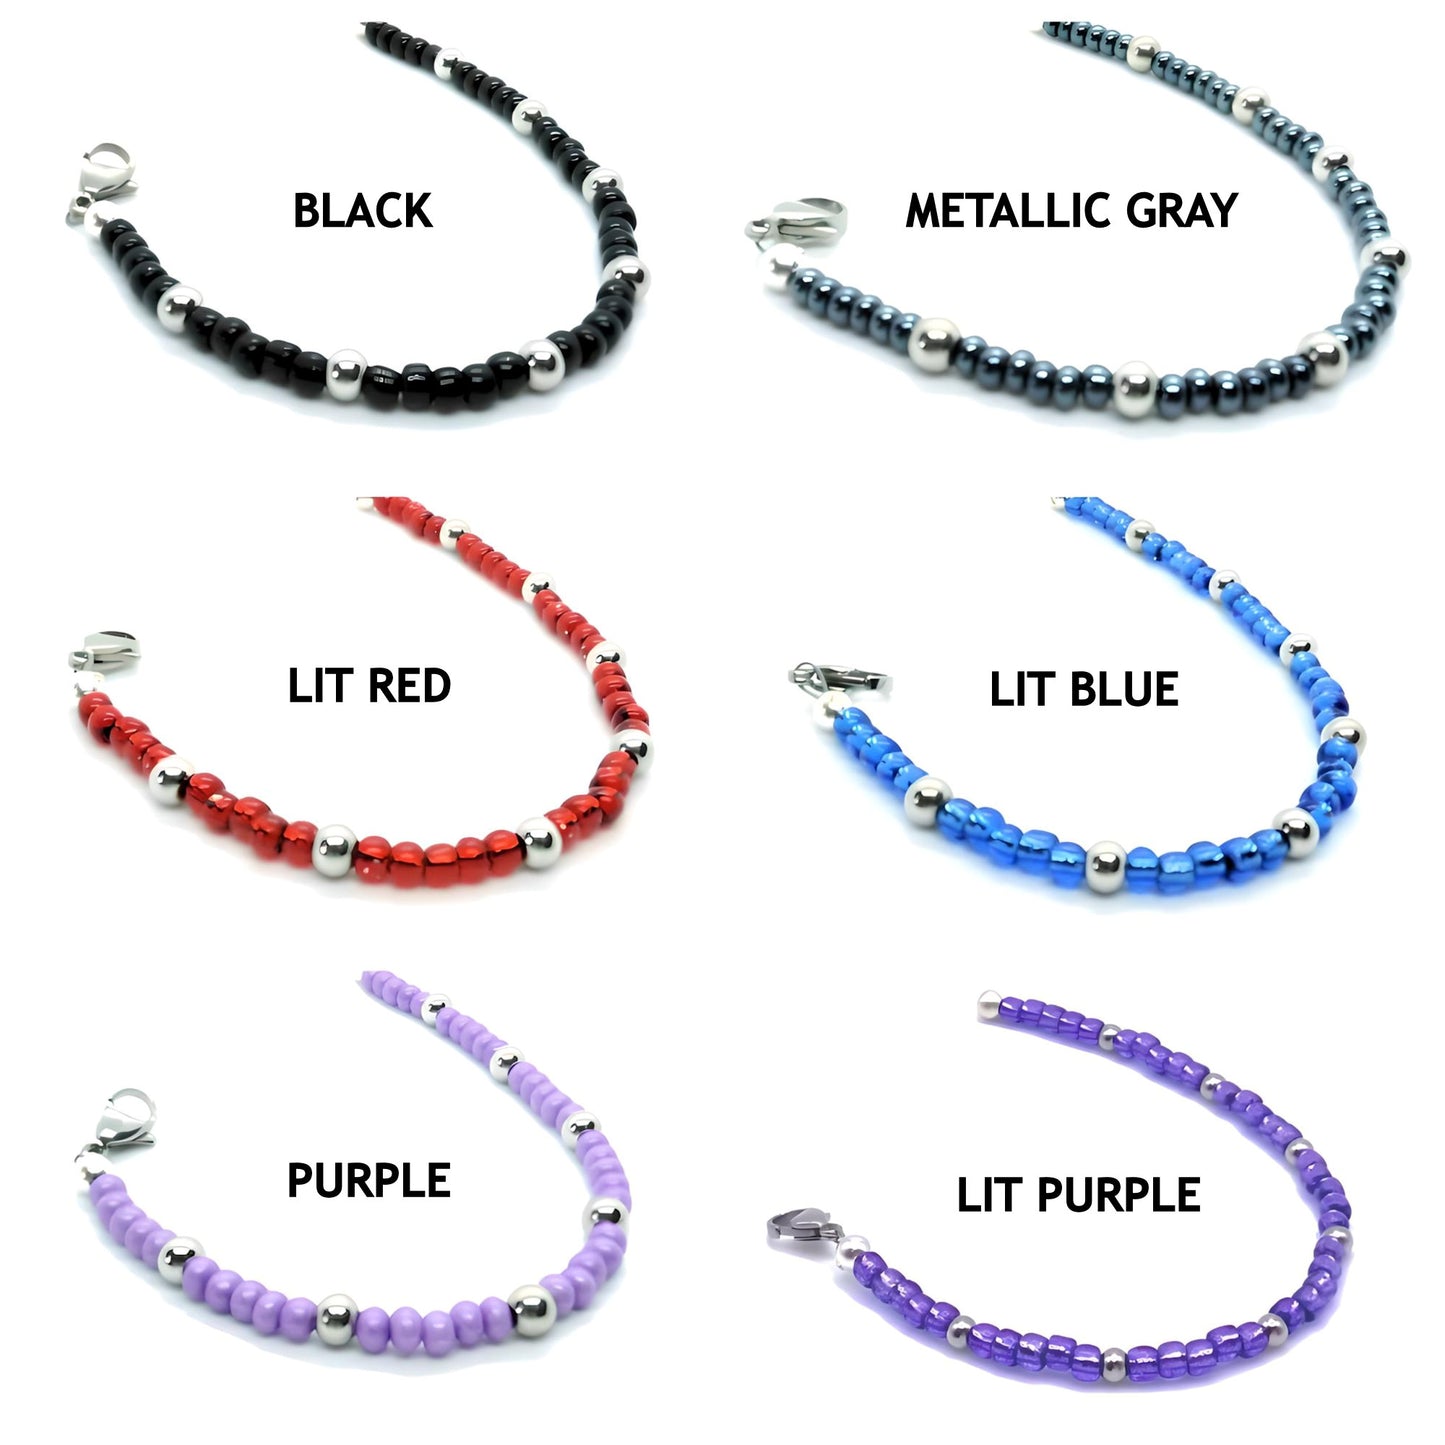 Sex Slave Anklet Bracelet with Lock and Jingling Bell Charm